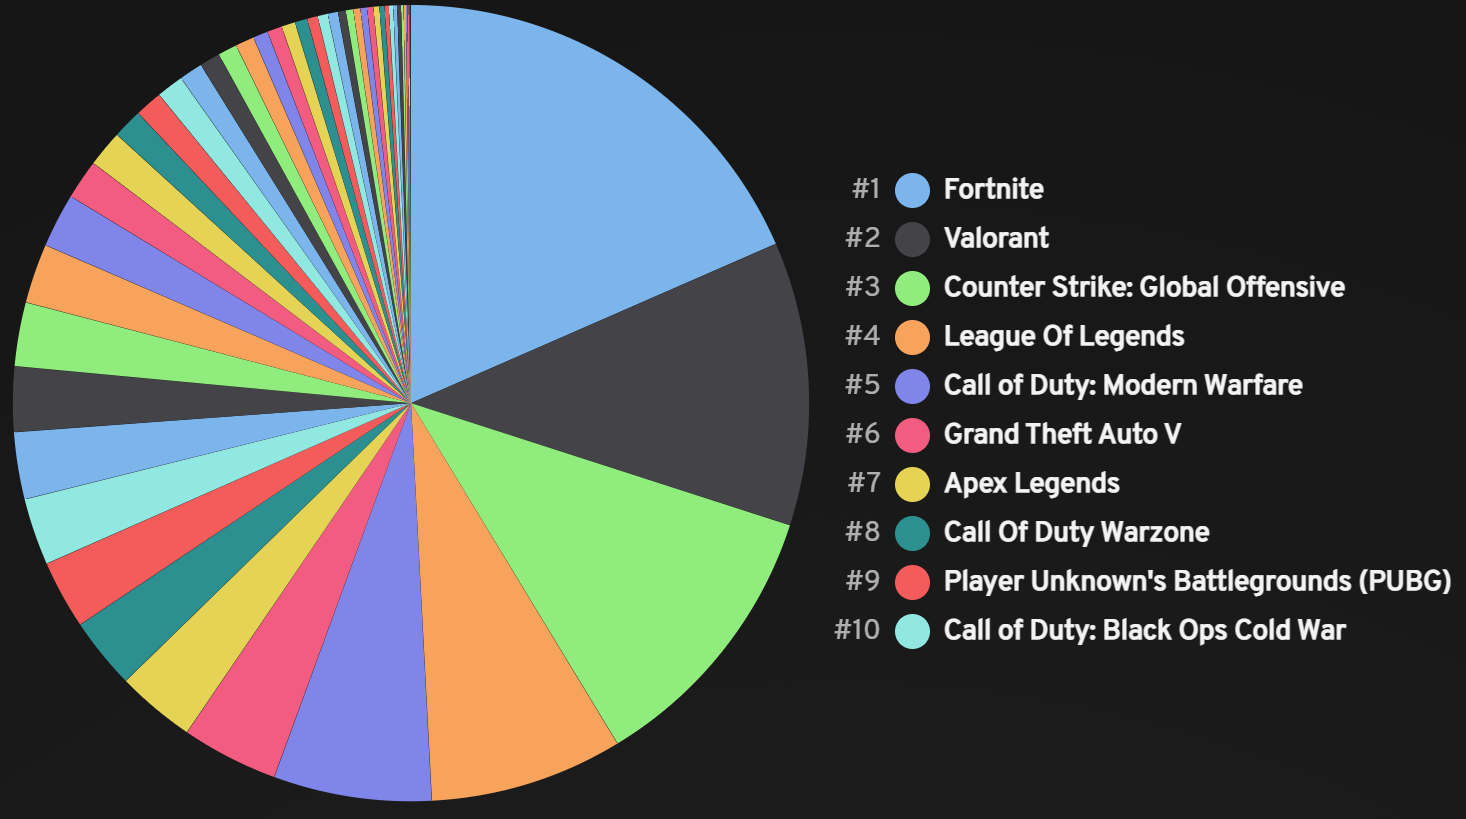 Our last months top played games